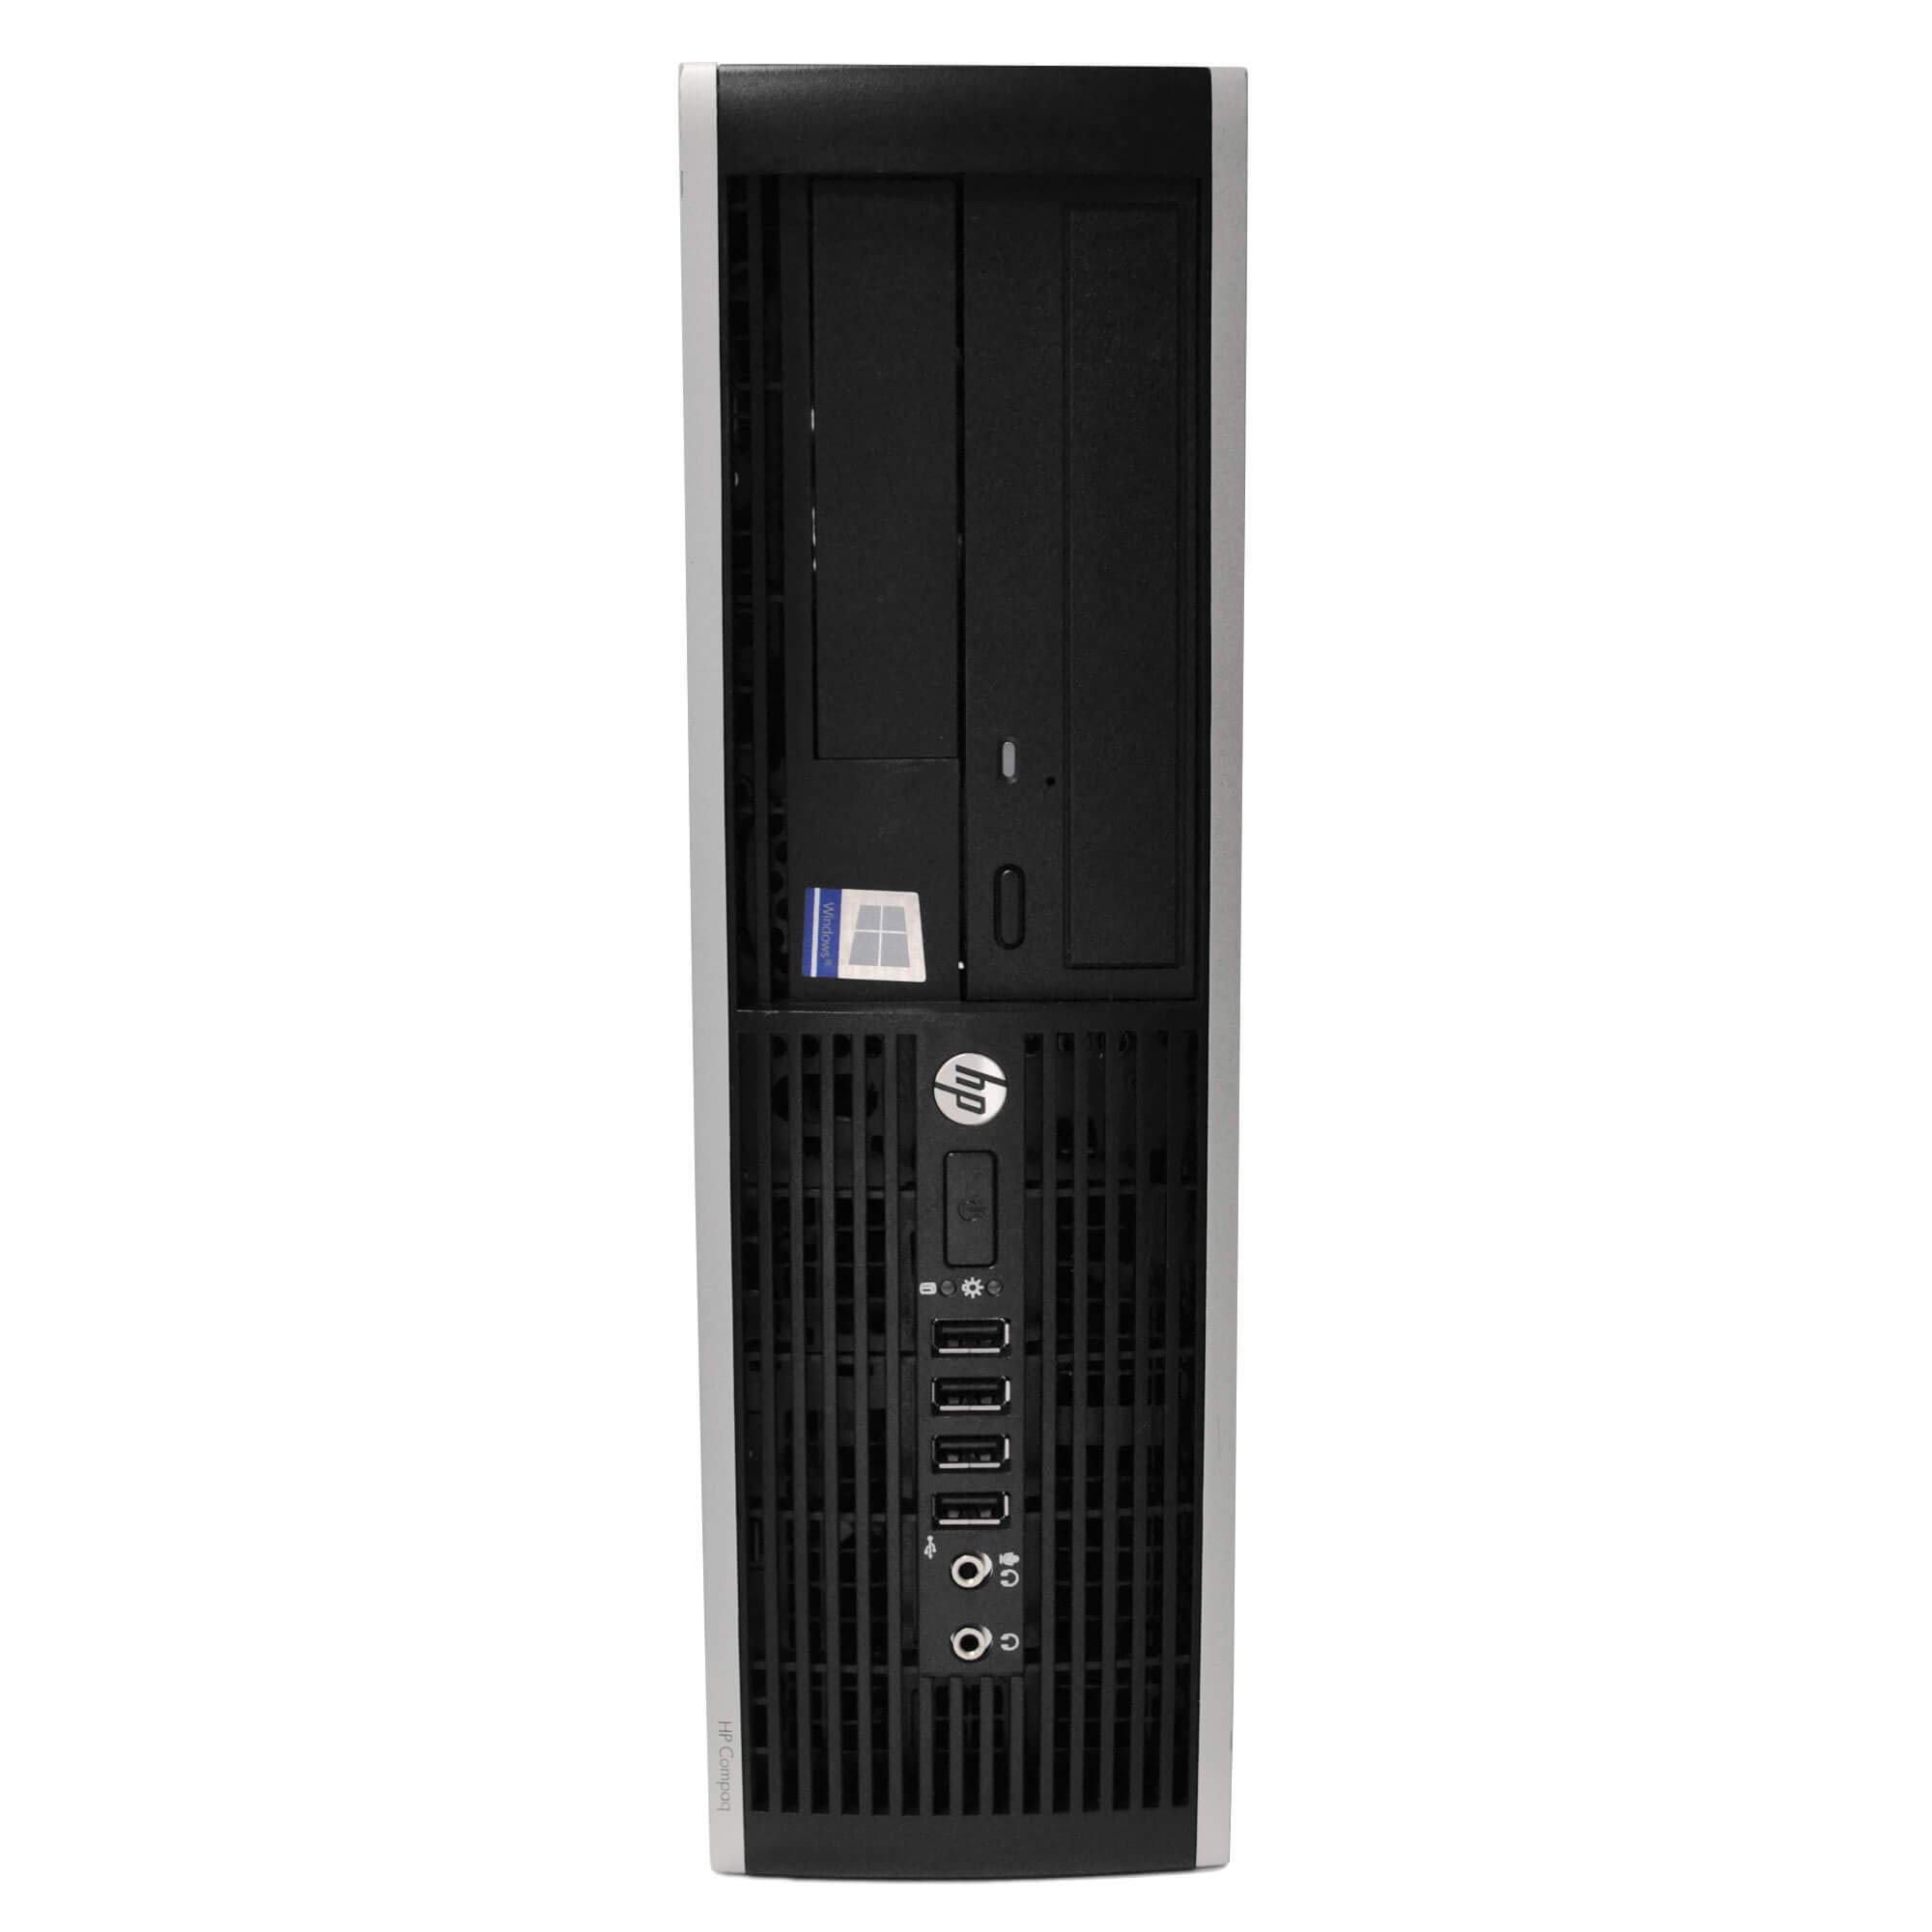 HP ProDesk 6200 Desktop Computer | Quad Core Intel i5 (3.2) | 8GB DDR3 RAM | 1TB HDD Hard Disk Drive | Windows 10 Home | New 22in LCD Monitor | Home or Office PC (Renewed), Black